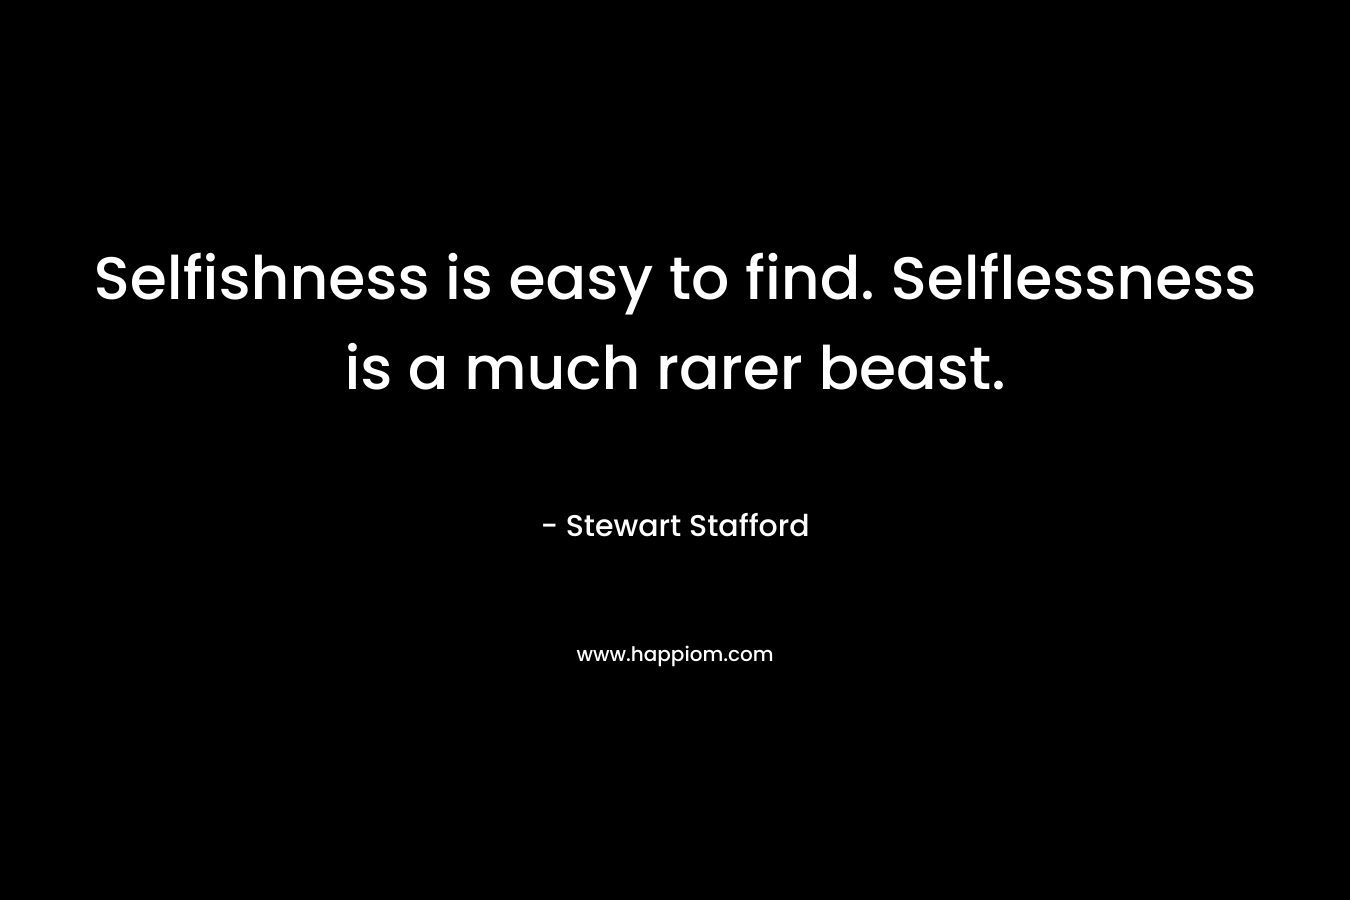 Selfishness is easy to find. Selflessness is a much rarer beast.